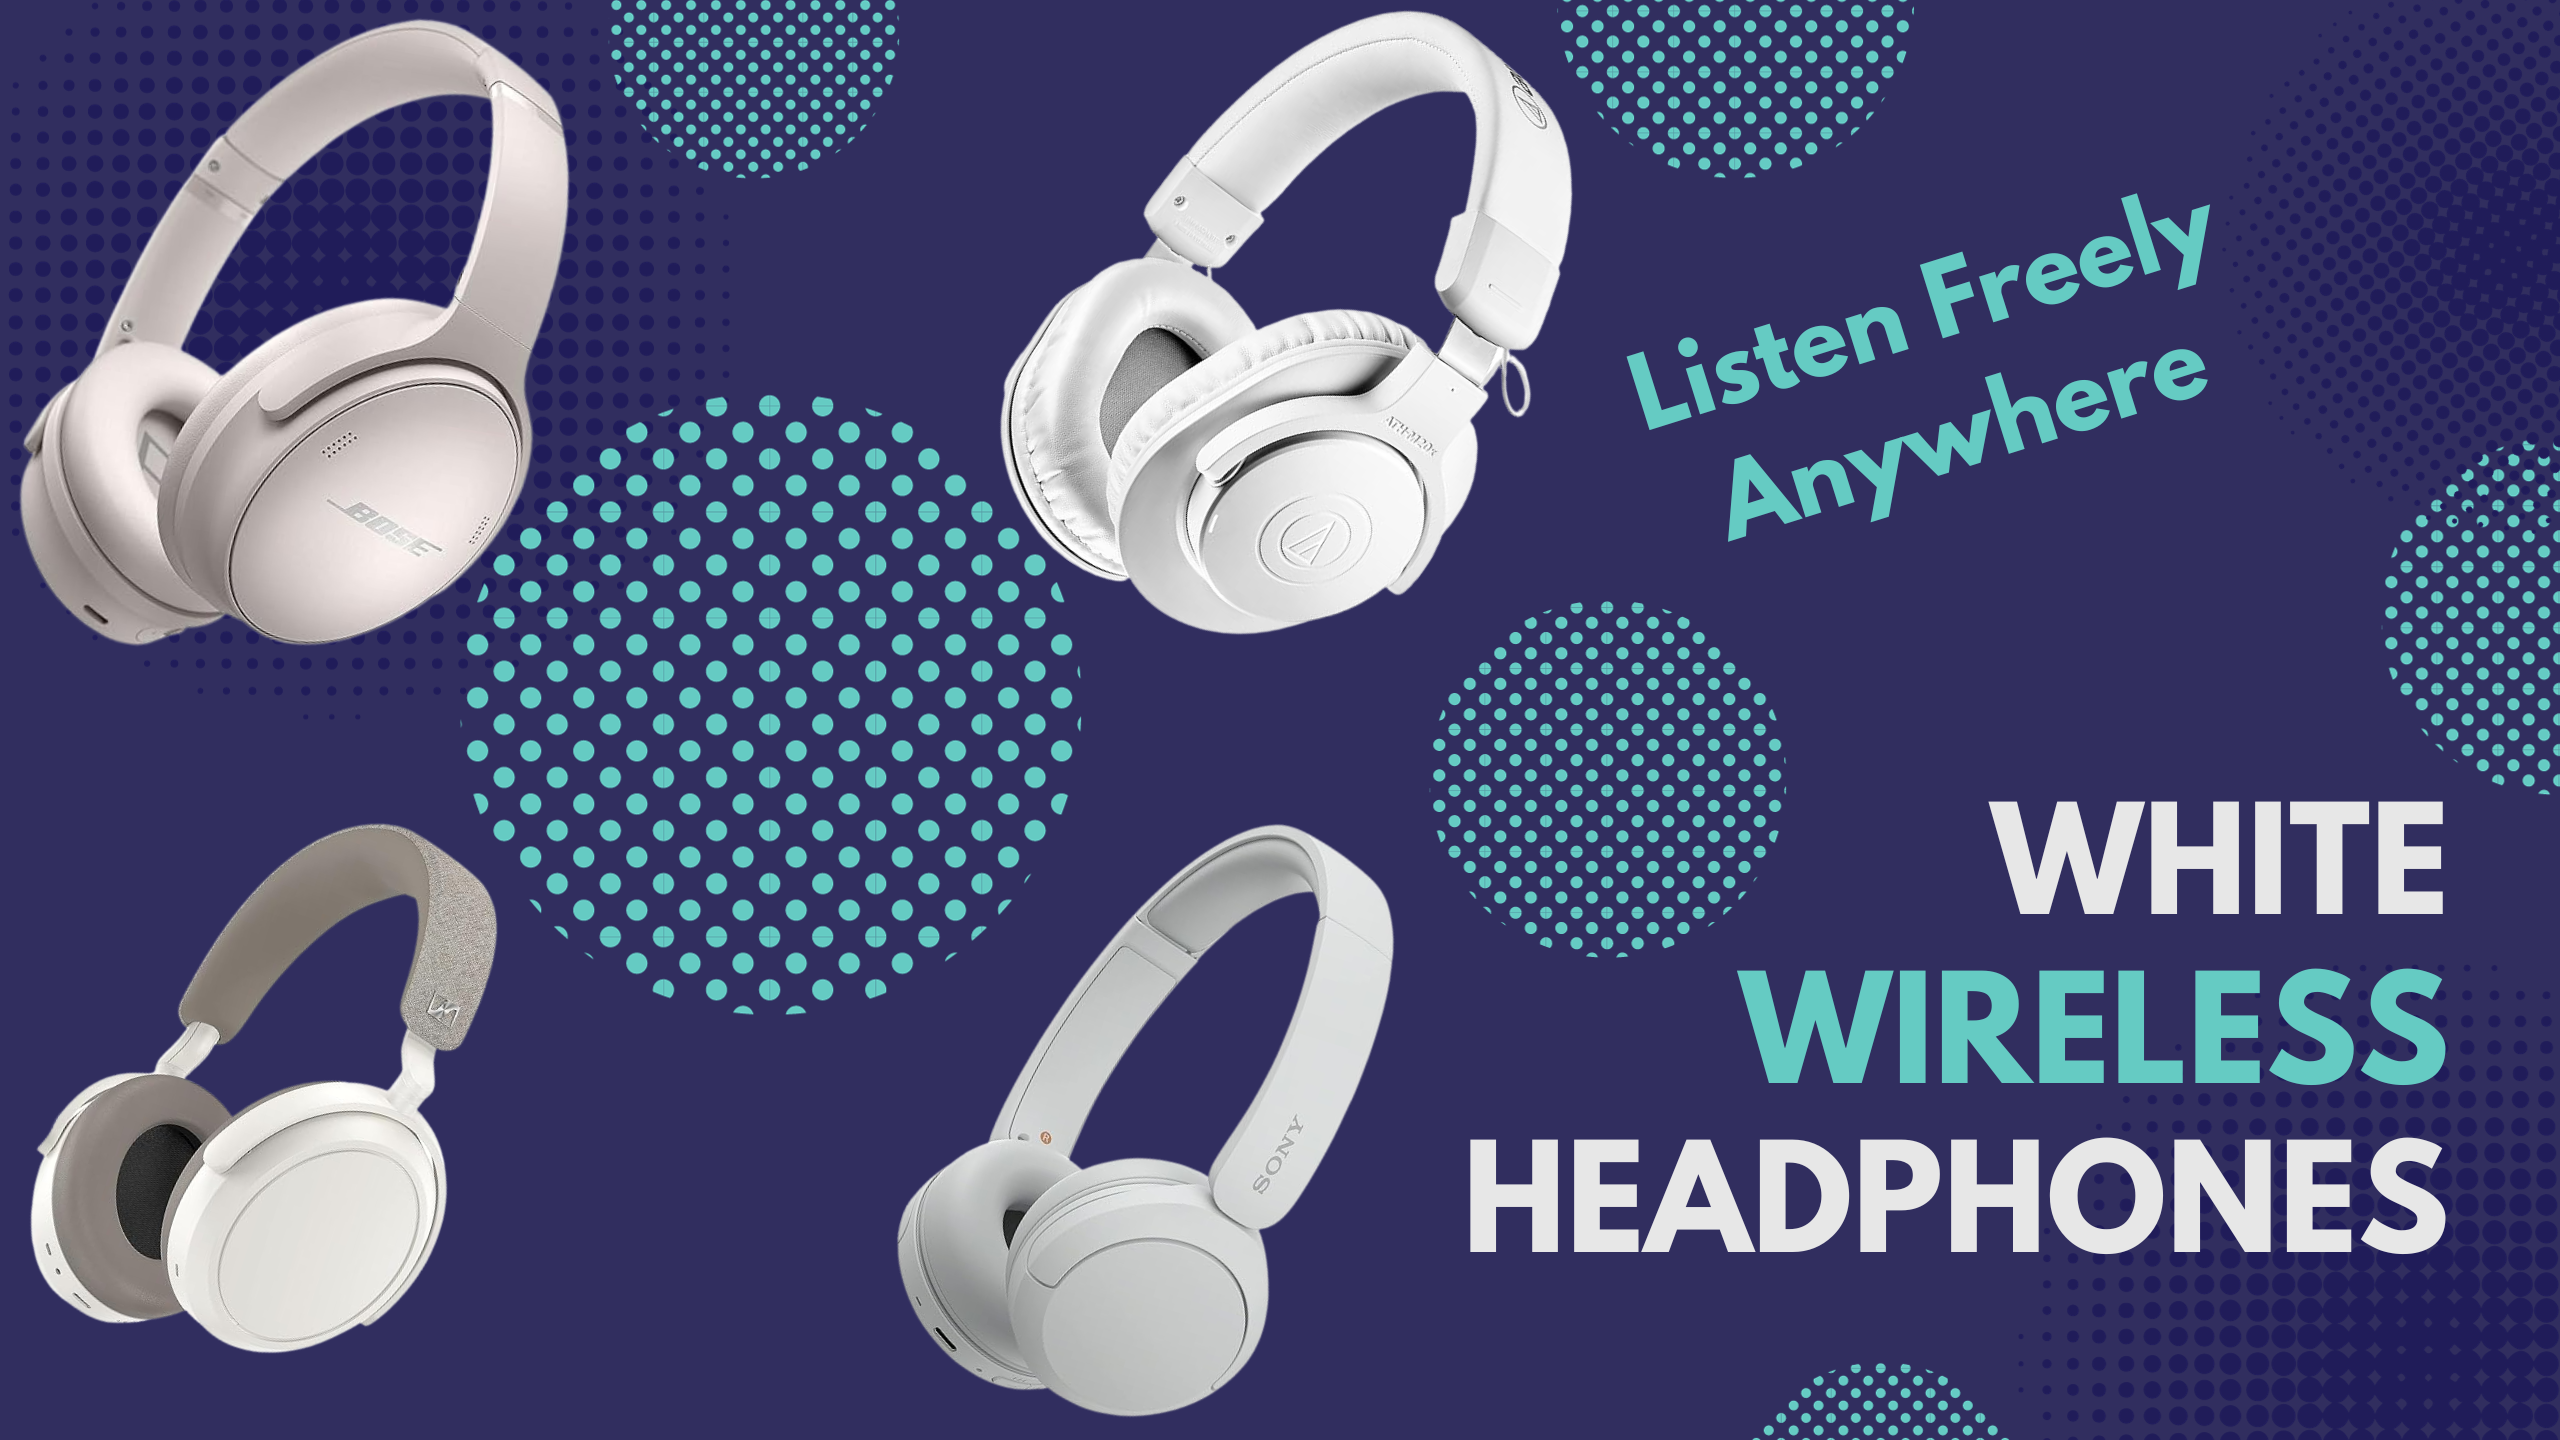 Get ready to jam out and tune out the world with white wireless headphones